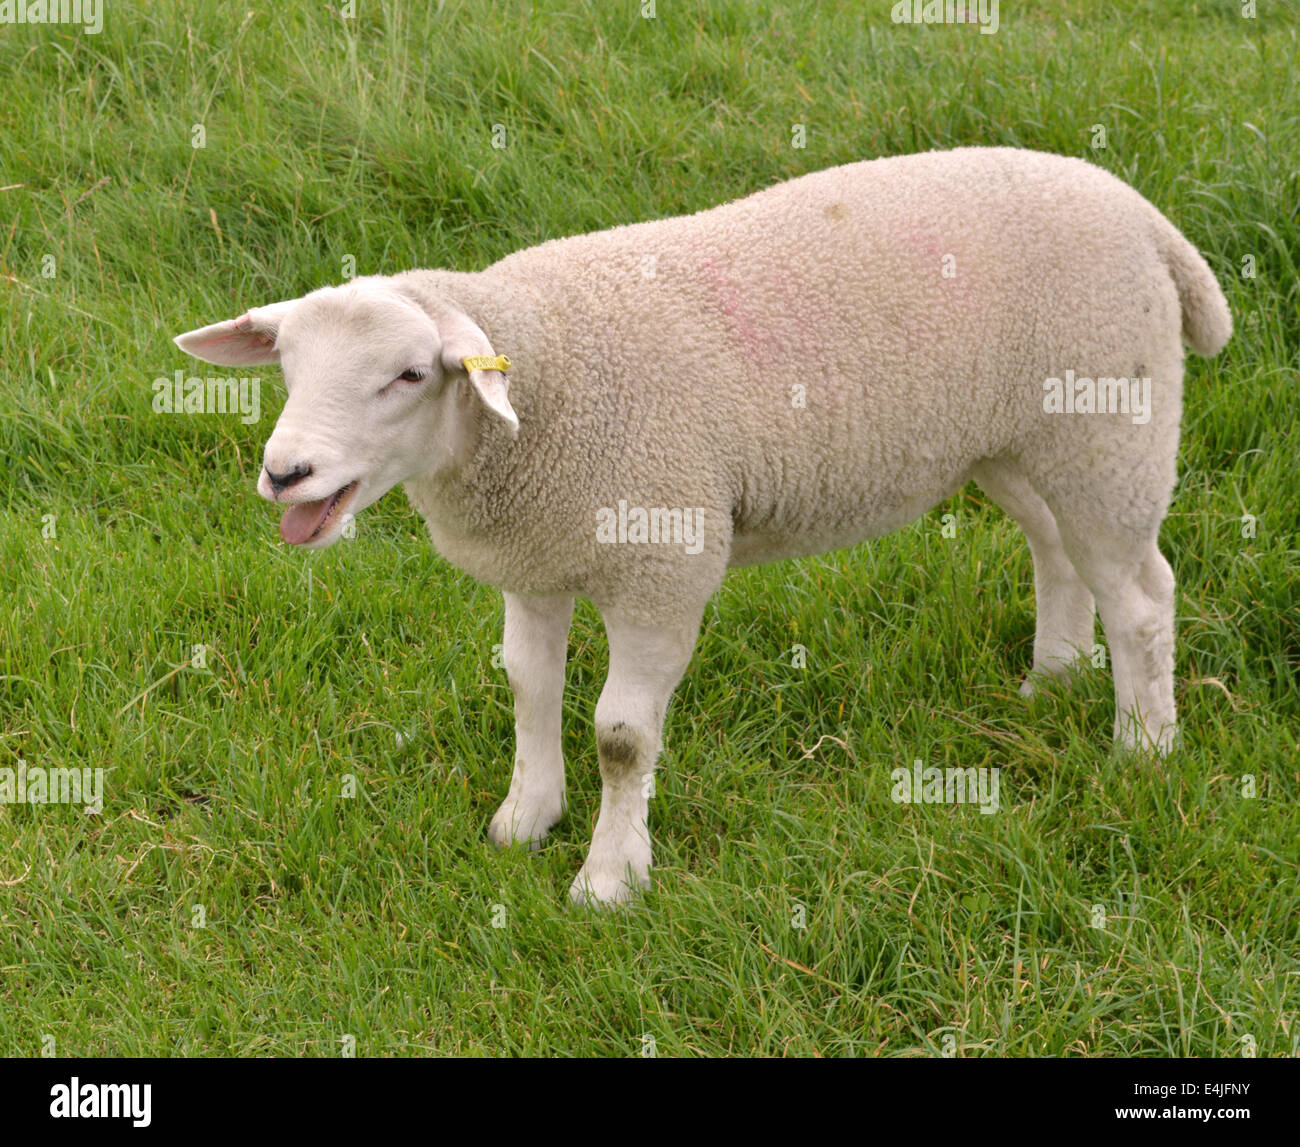 Photograph of a sheep in a pasture Stock Photo